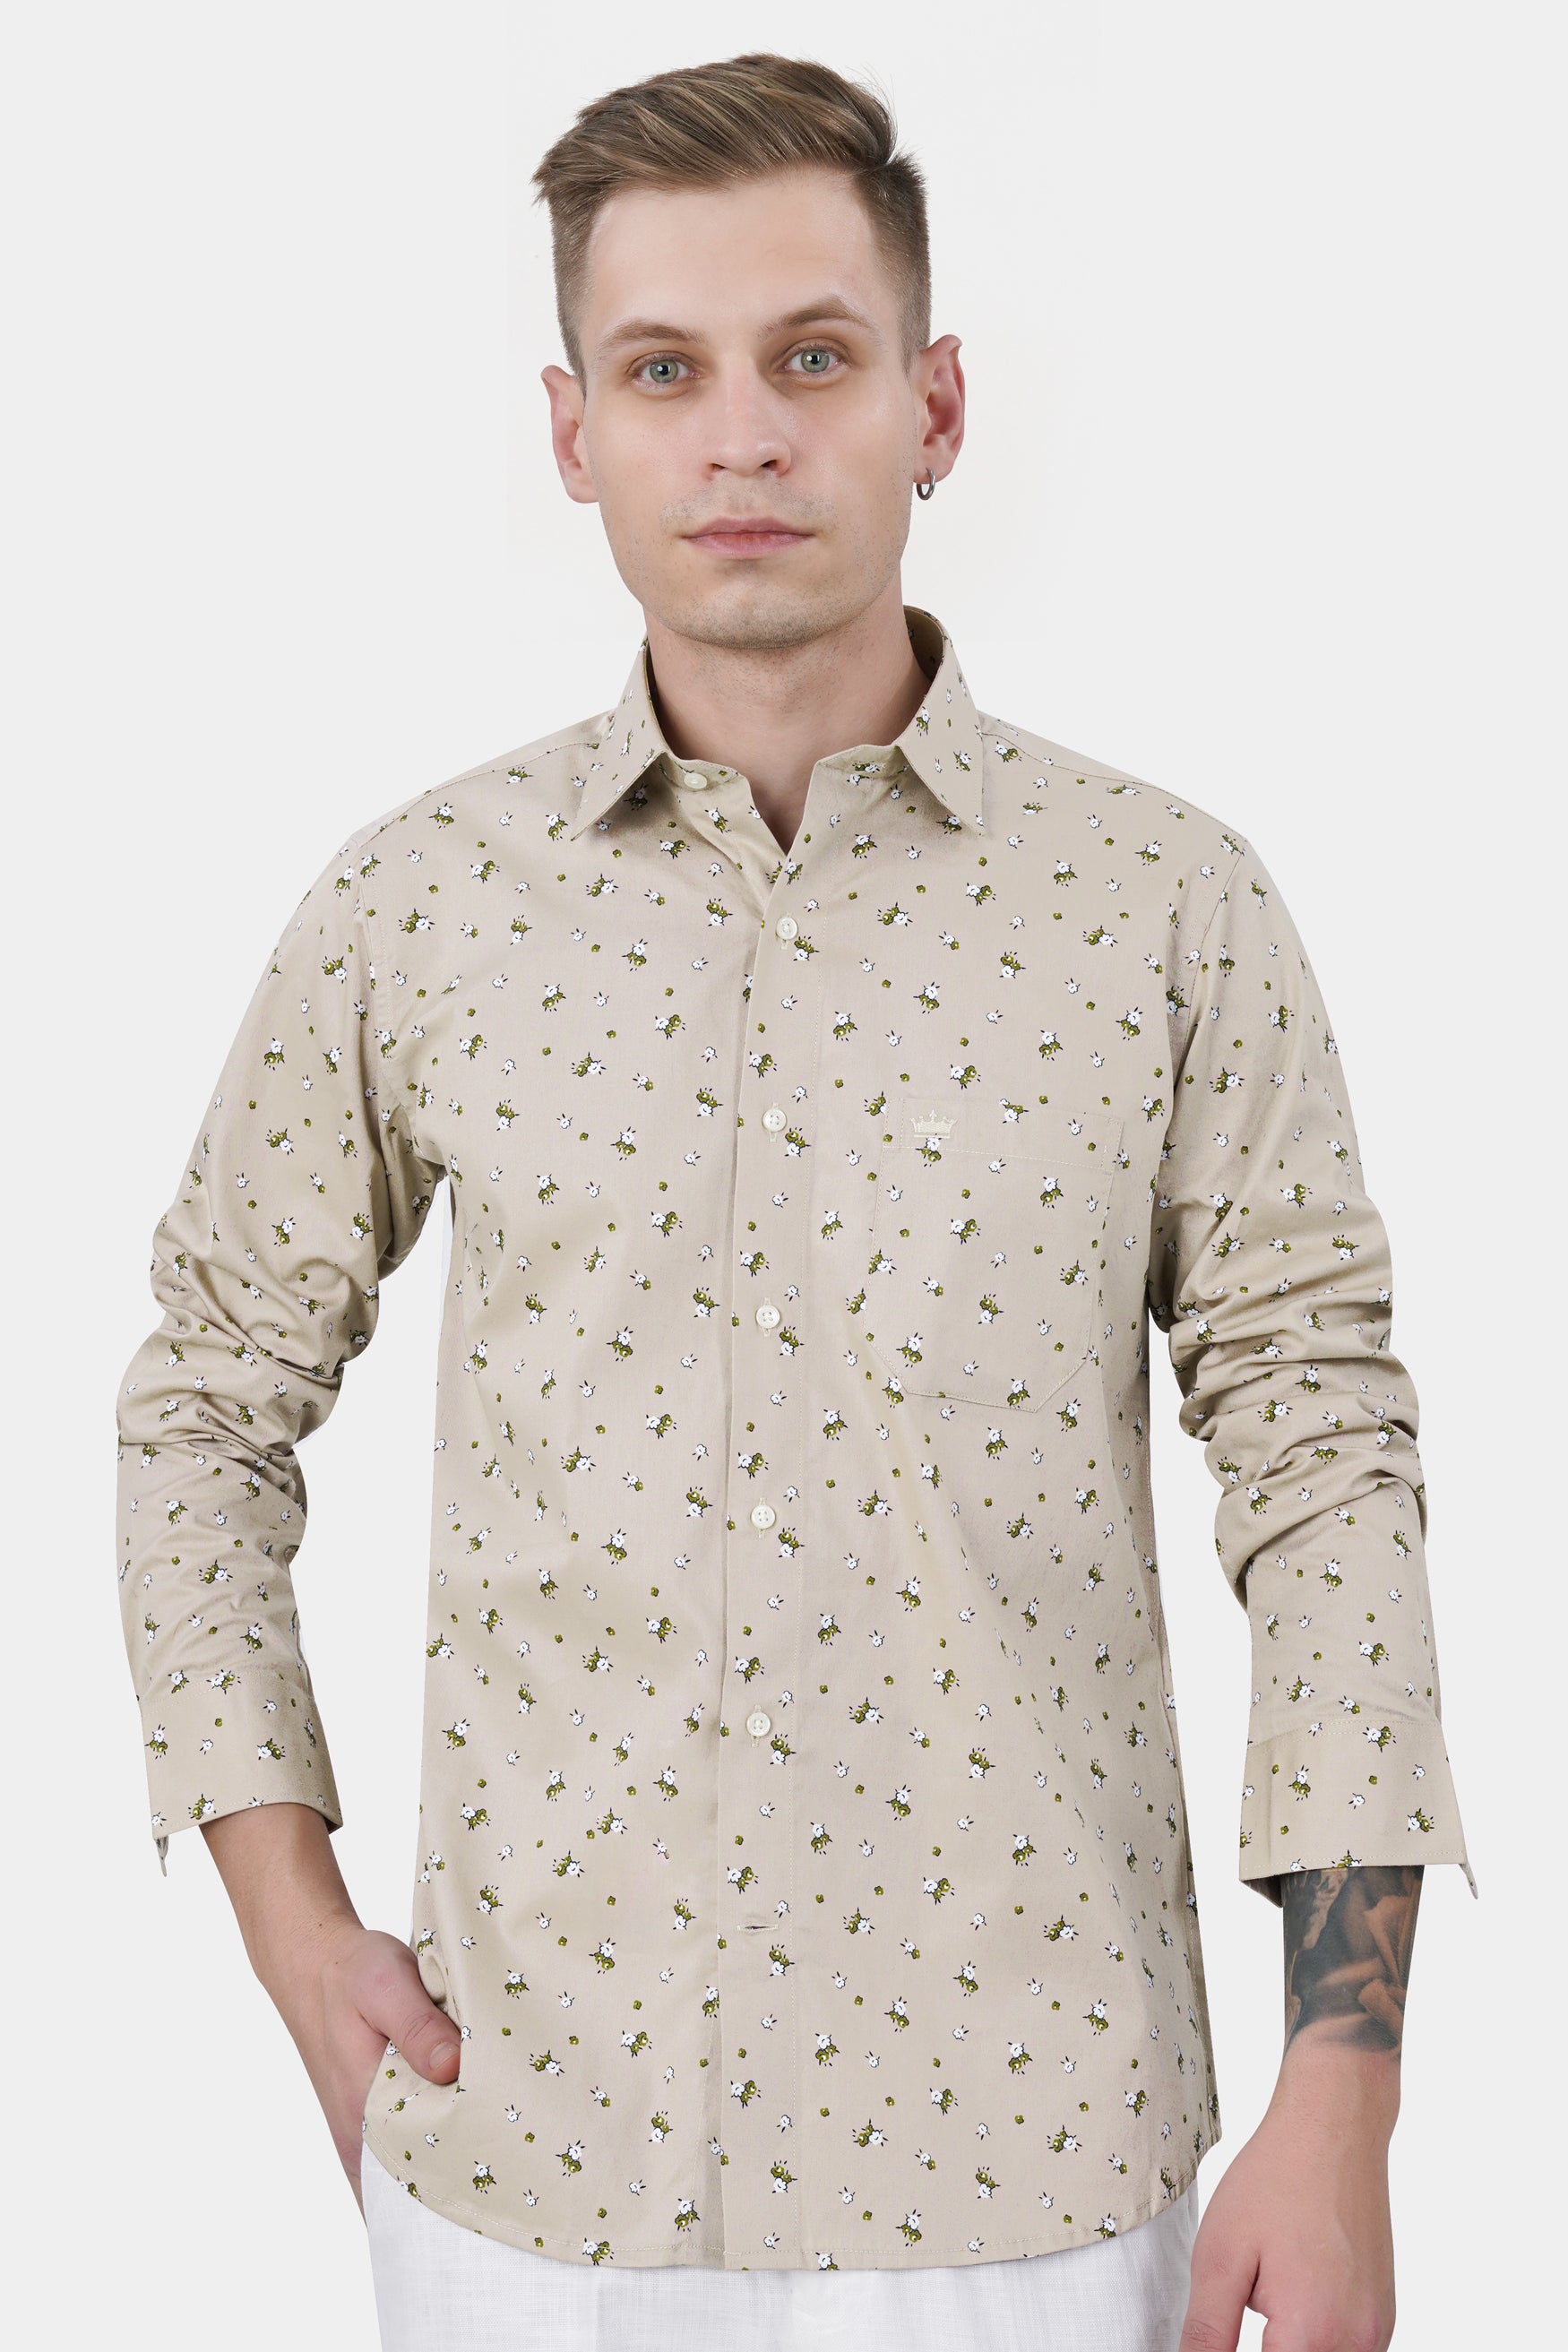 Bison Brown with Sycamore Green and White Ditsy Printed Royal Oxford Shirt 11696-38, 11696-H-38, 11696-39, 11696-H-39, 11696-40, 11696-H-40, 11696-42, 11696-H-42, 11696-44, 11696-H-44, 11696-46, 11696-H-46, 11696-48, 11696-H-48, 11696-50, 11696-H-50, 11696-52, 11696-H-52